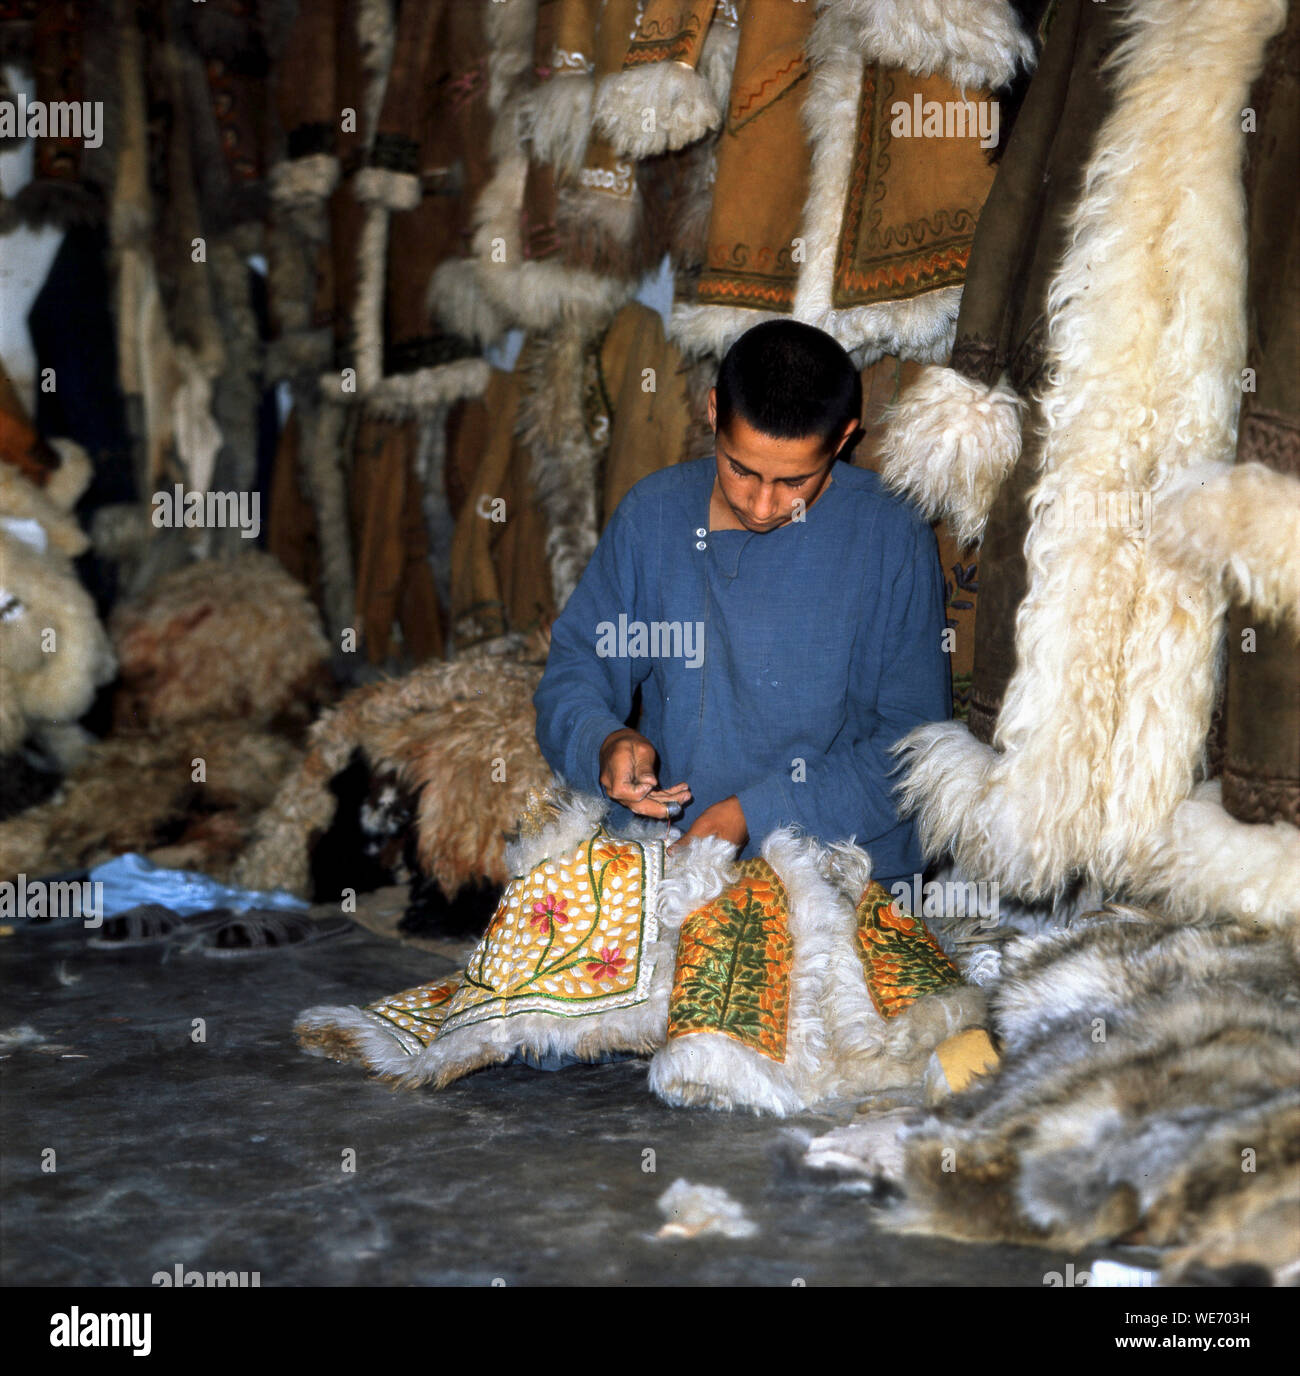 Afghan Coat High Resolution Stock Photography and Images - Alamy